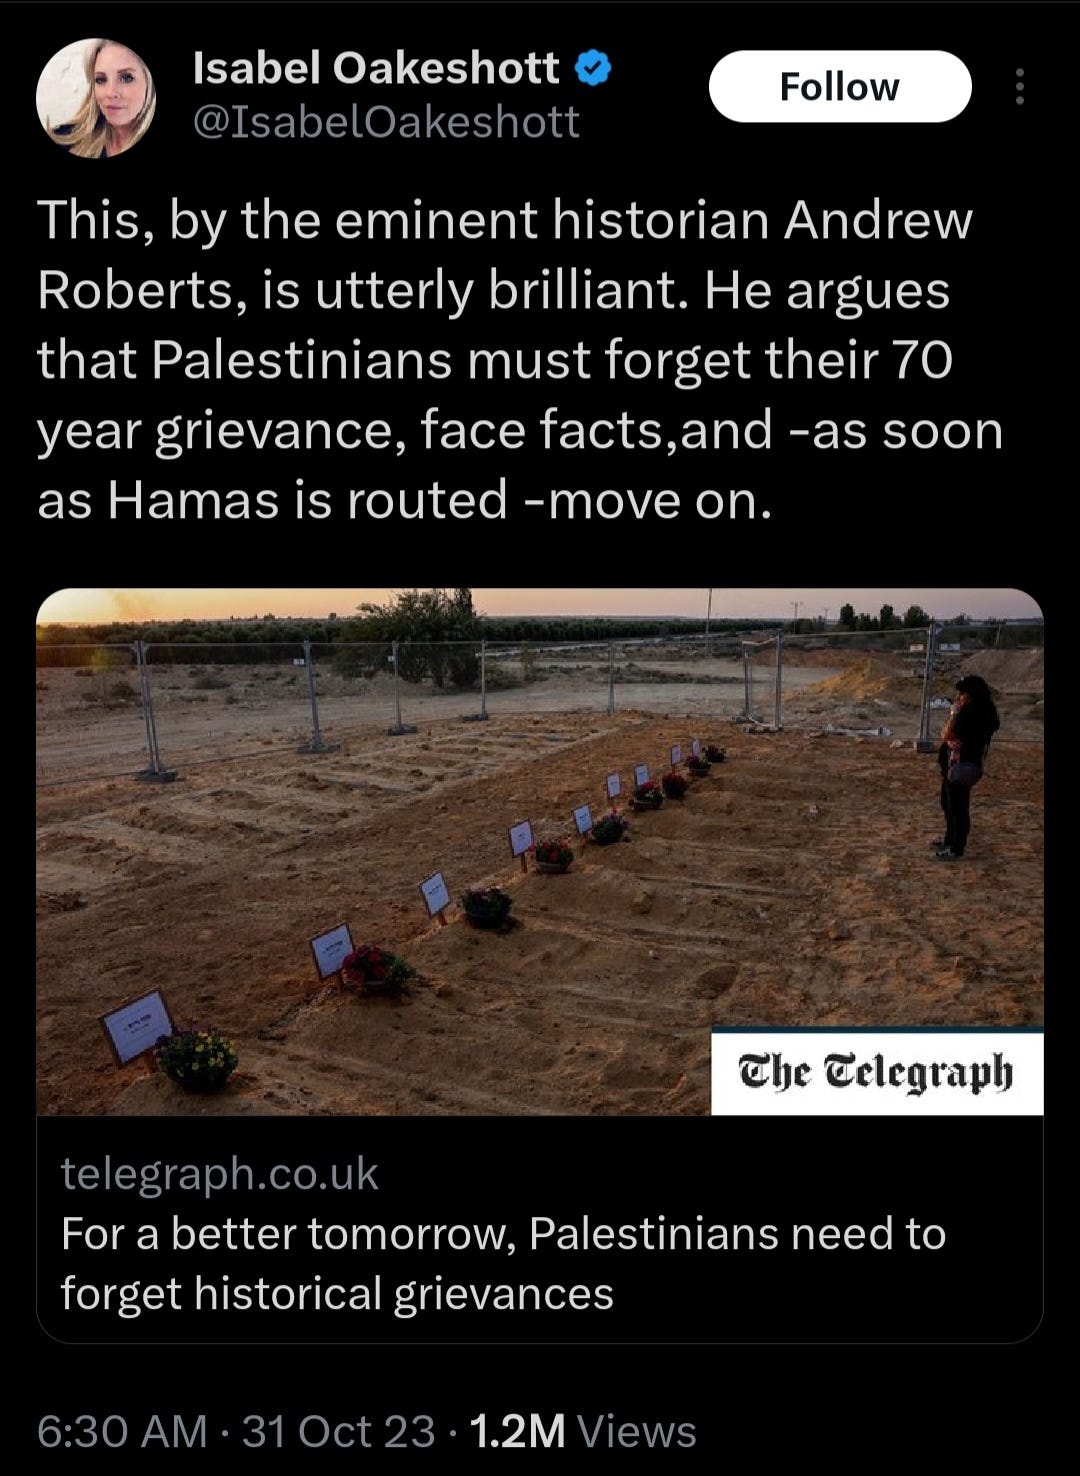 Tweet from @ IsabelOakeshott “This, by the eminent historian Andrew Roberts, is utterly brilliant. he argues that Palestinians must forget their 70-year grievance, face facts, and -as soon as Hamas is rooted- move on.” And links a The Telegraph article titled “For a better tomorrow, Palestinians need to forget historical grievances”